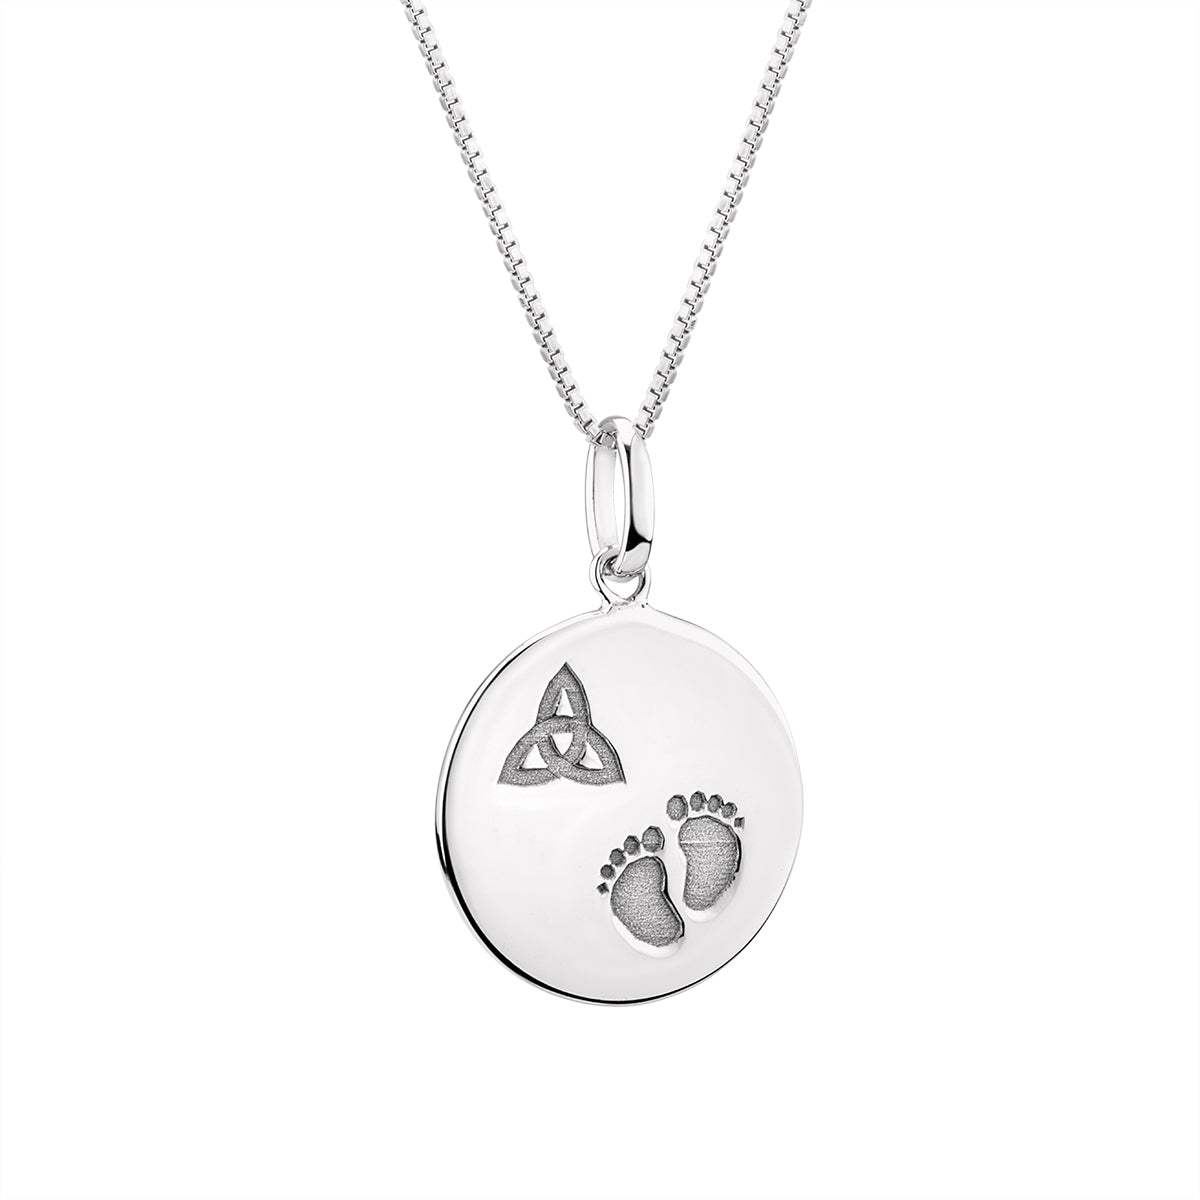 High polished sterling silver Celtic disc pendant S46890 with engraved trinity knot and baby foot from Solvar